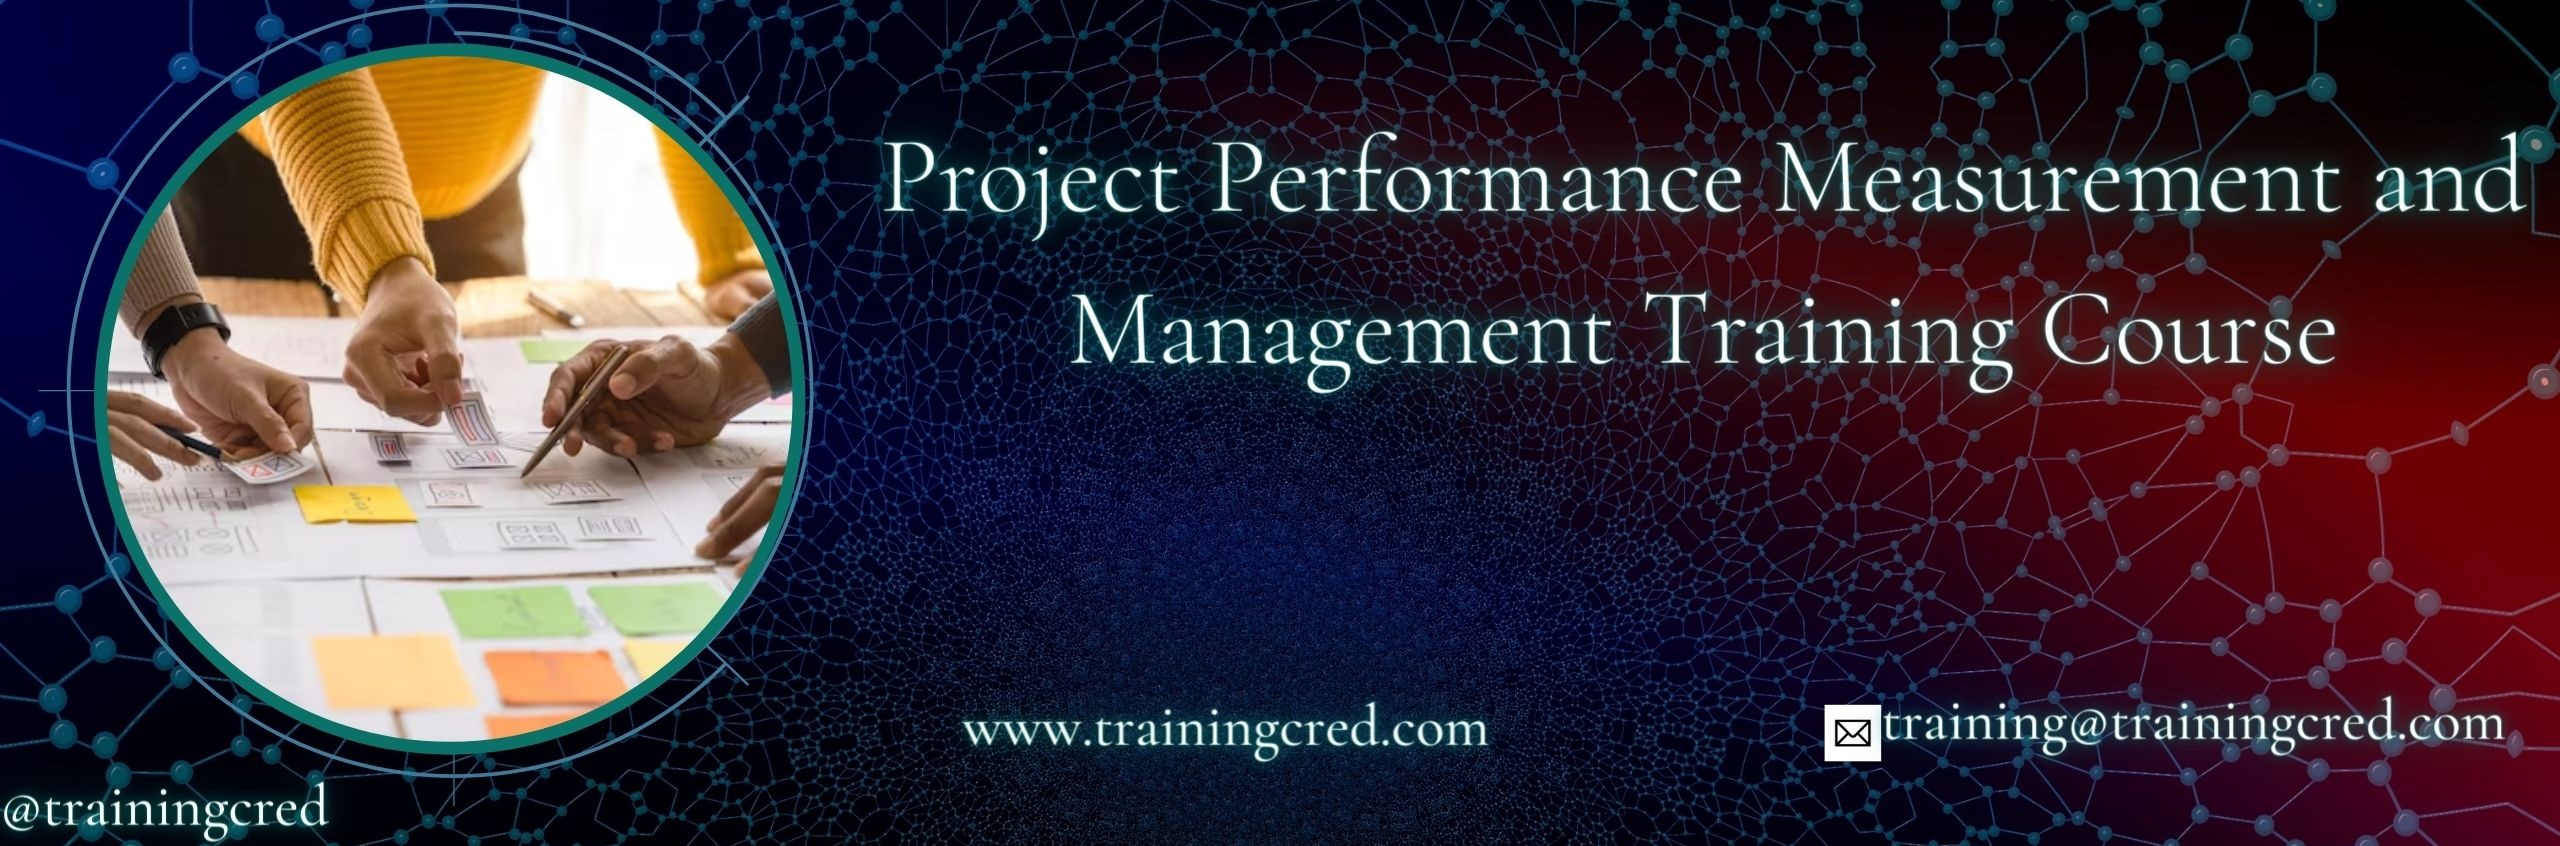 Project Performance Measurement and Management Training